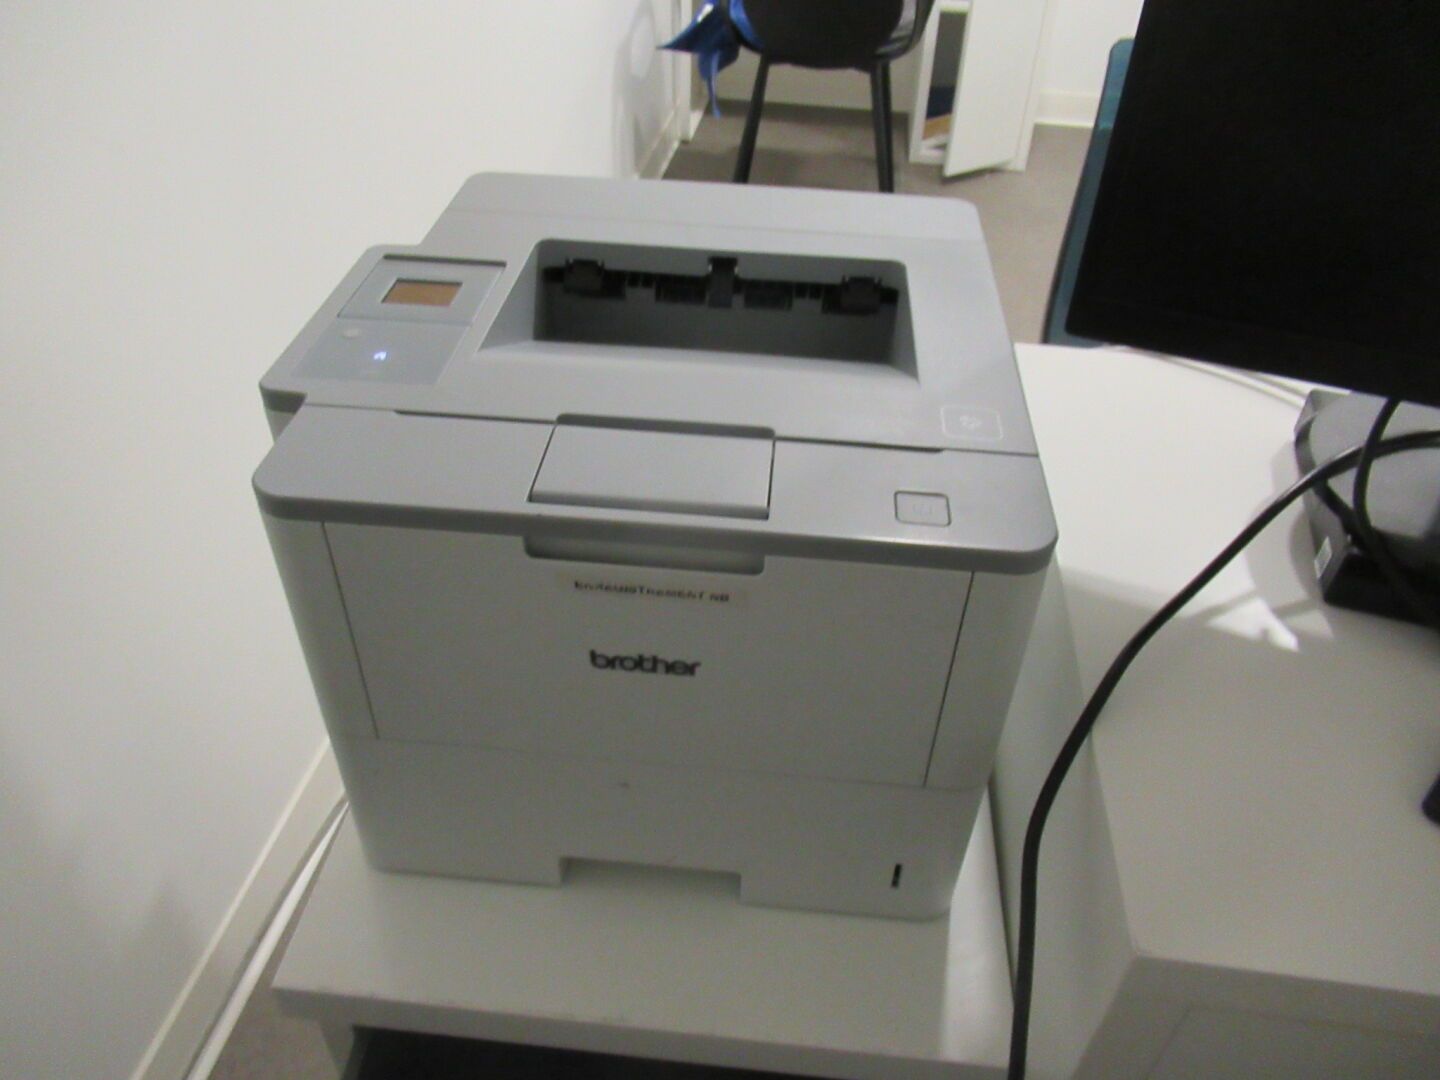 Null 1 Brother L6400DW printer